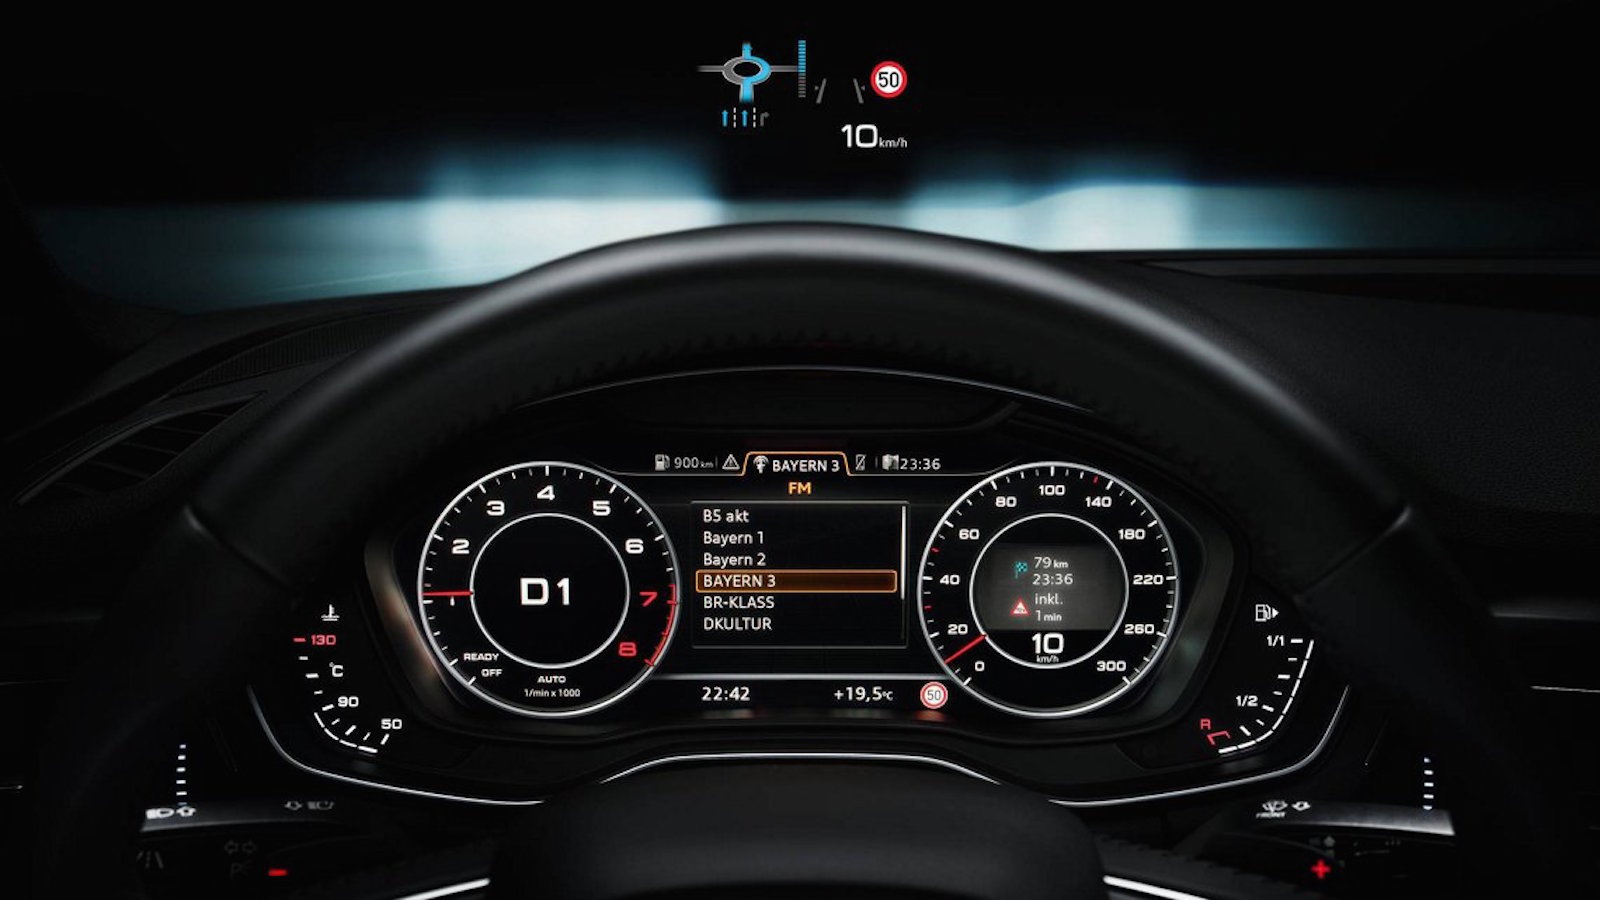 Daily Slideshow: All Need to Know About Audi's HUD